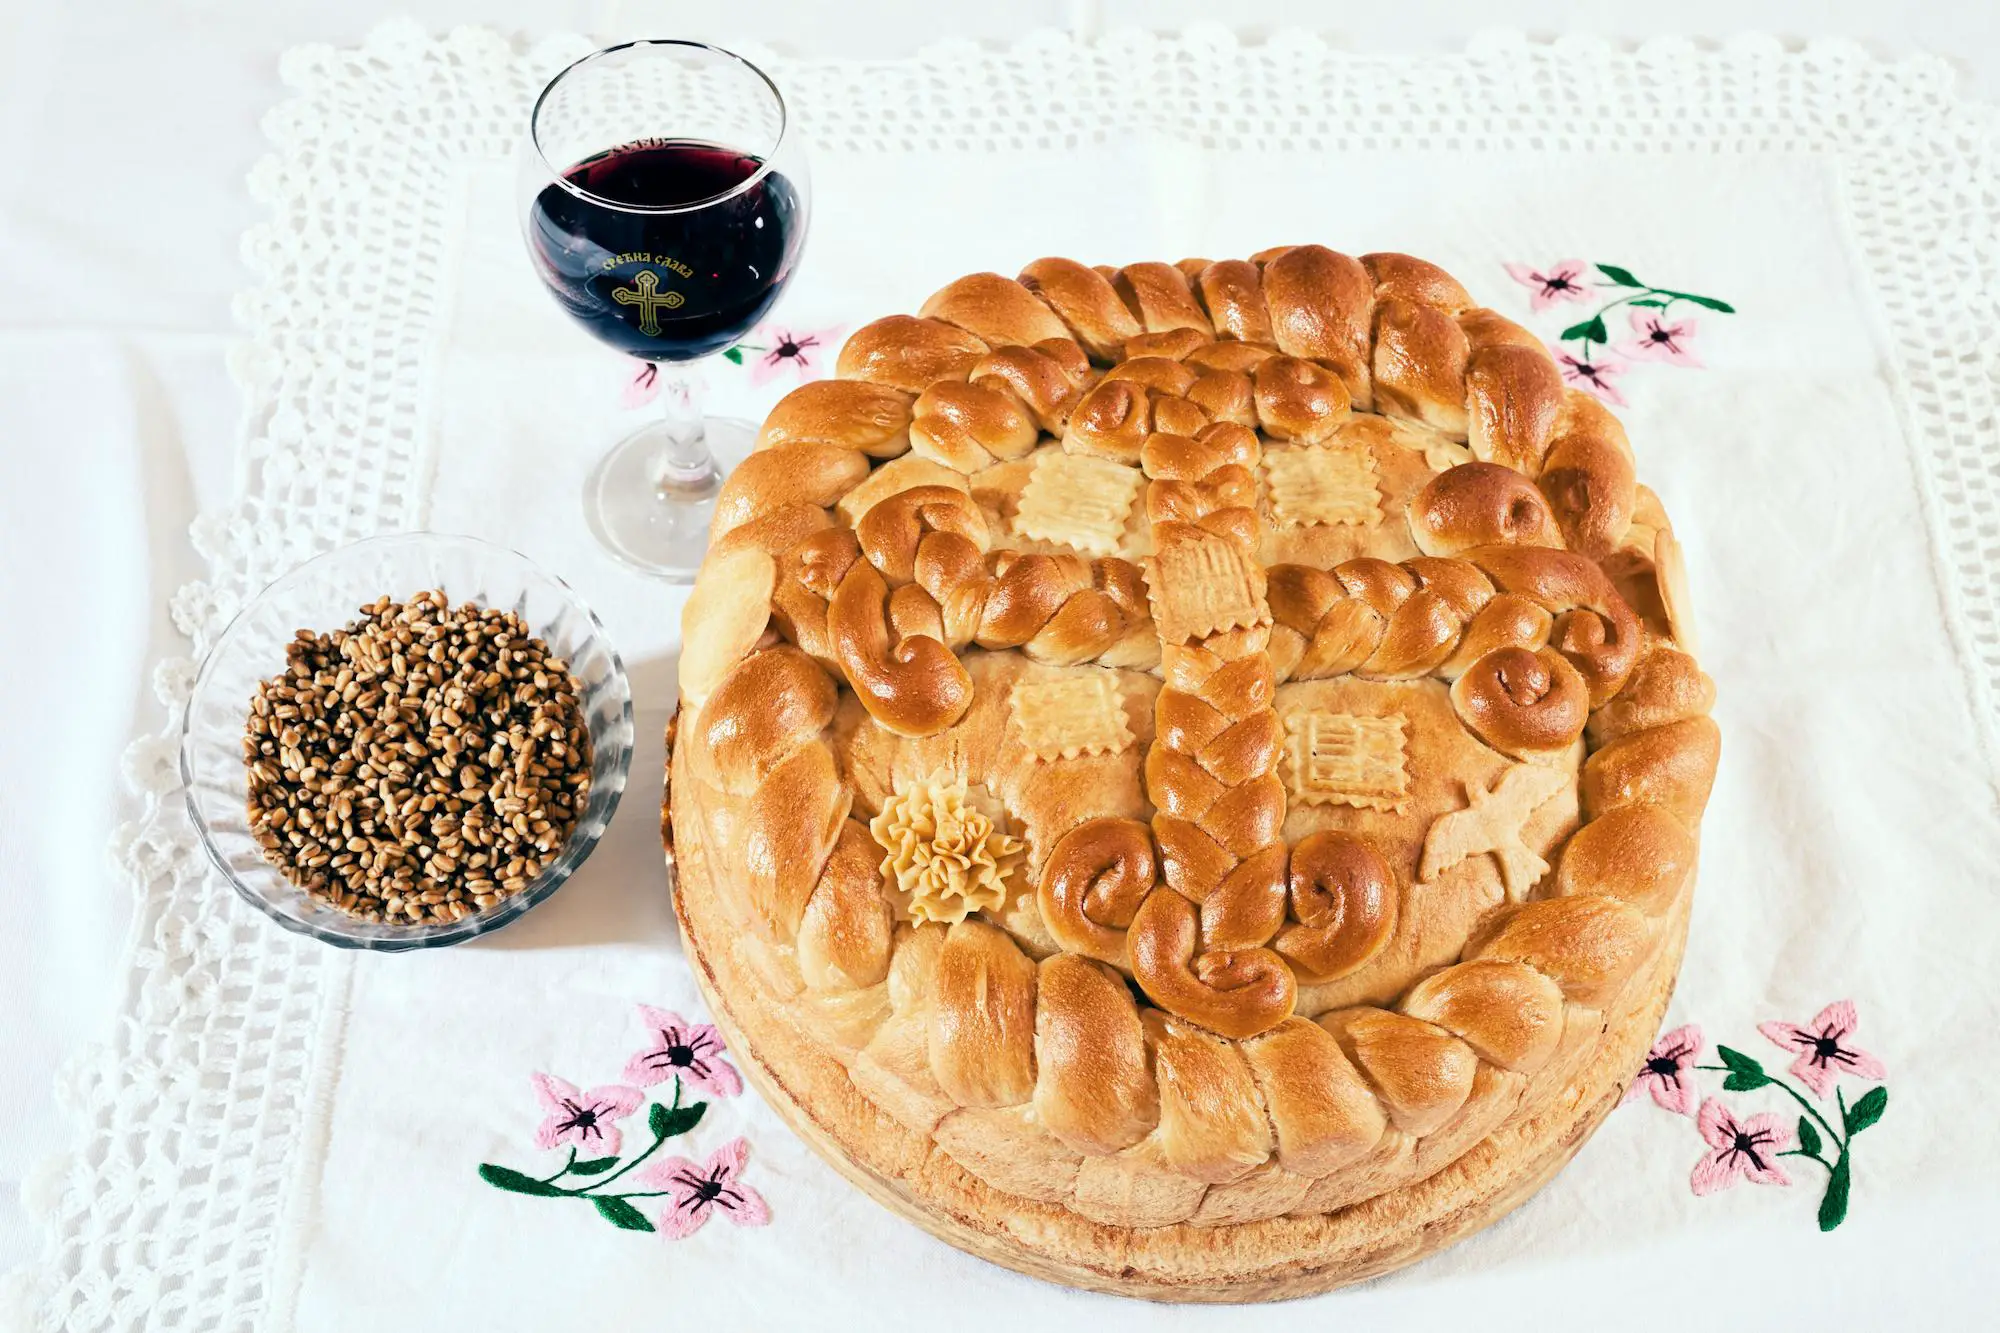 Serbian Slava: What Is It & Why It Is Celebrated